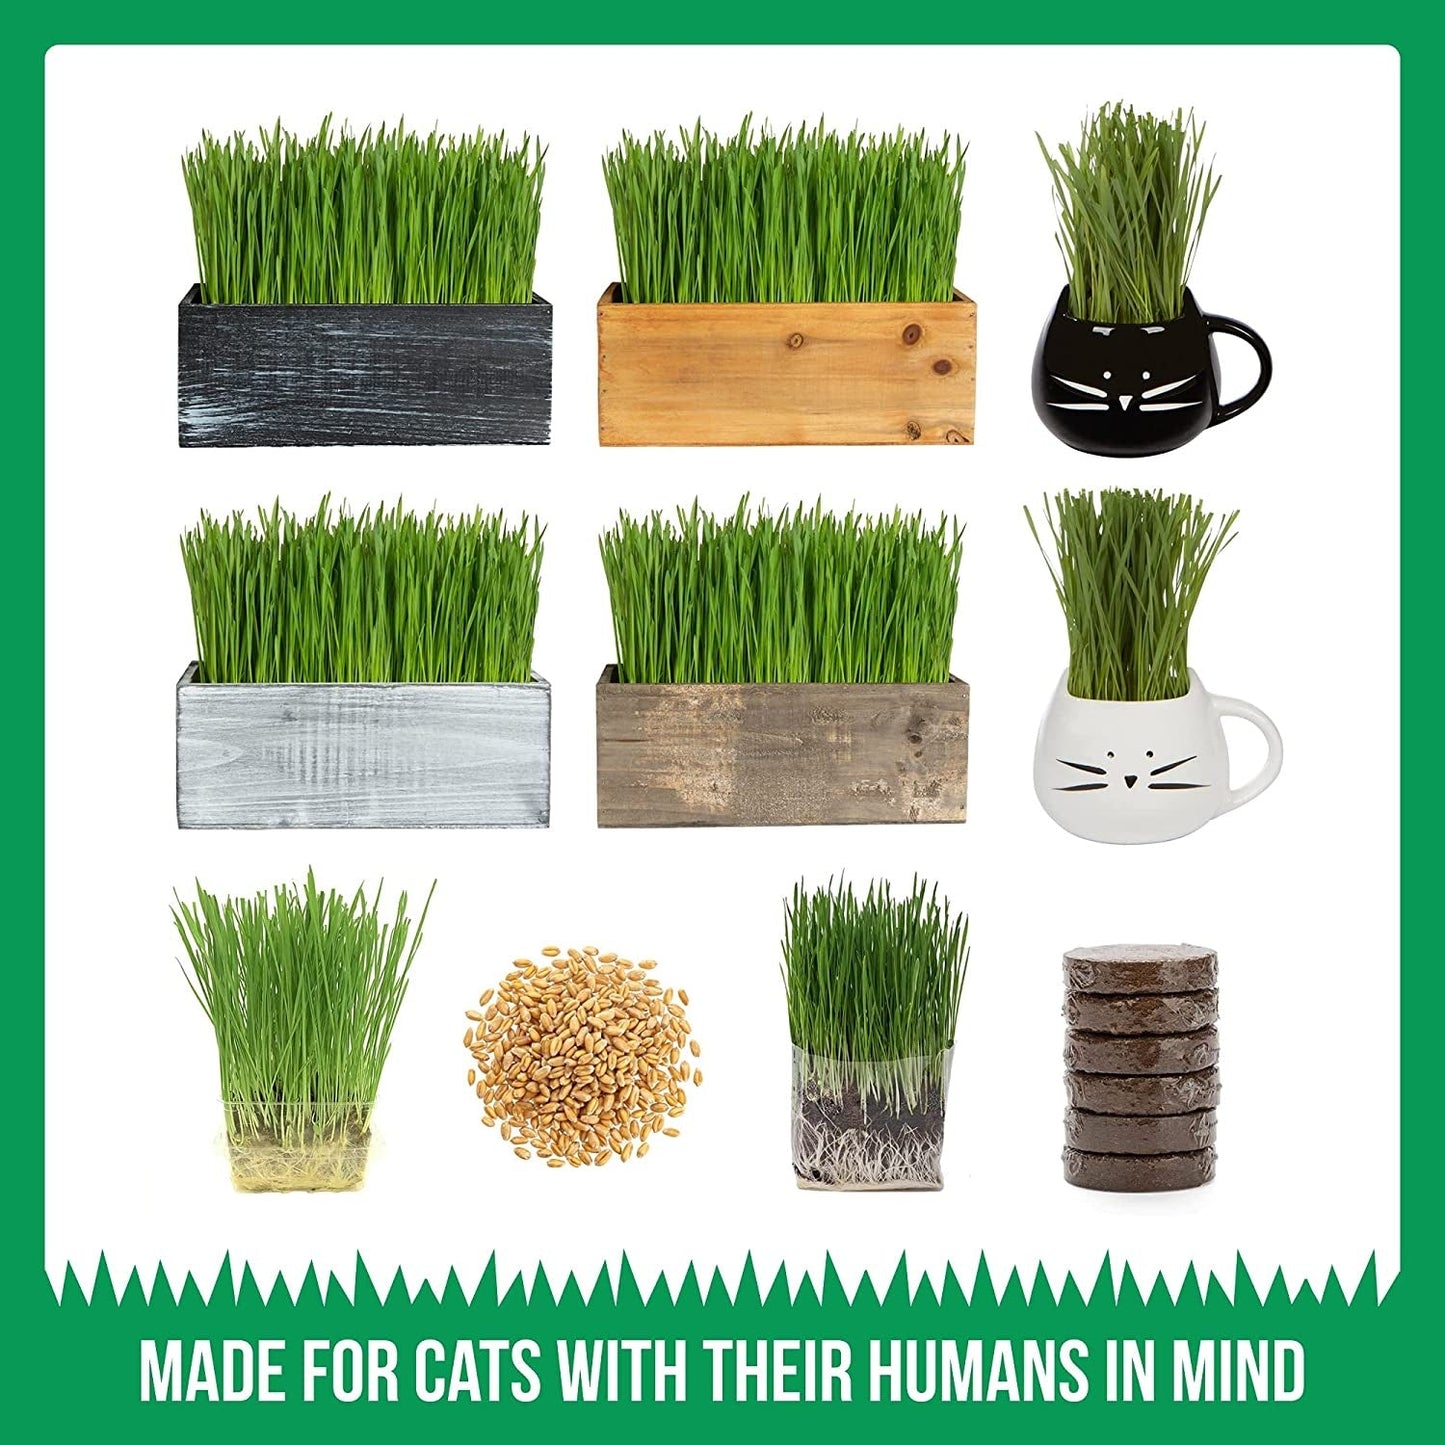 Cat Grass Growing Kit - (3 Pack) Organic Cat Grass Seed and Soil